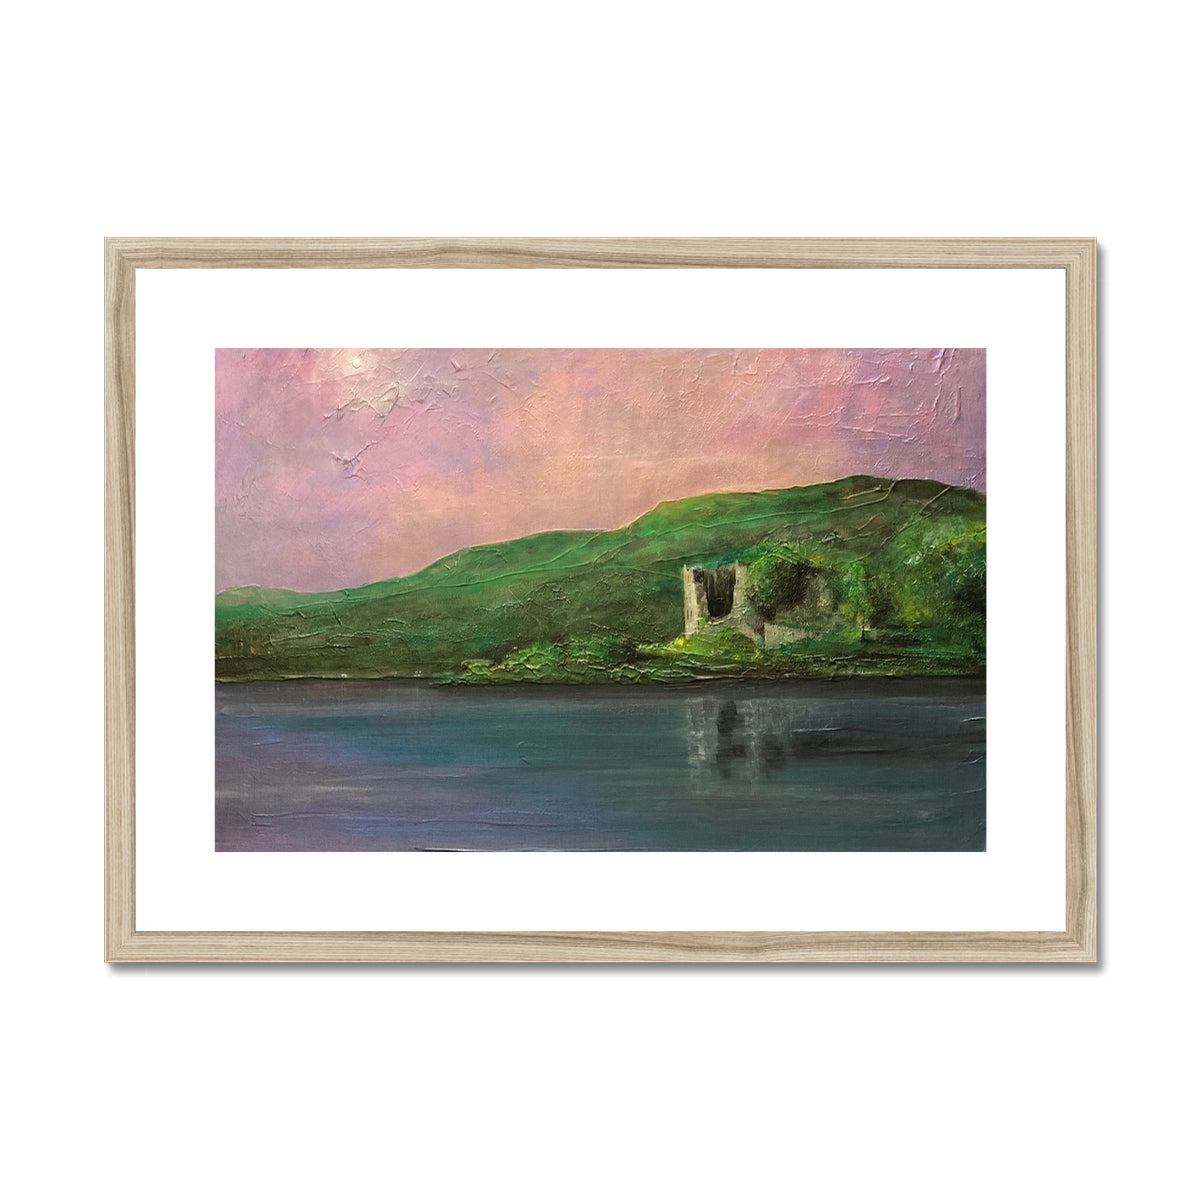 Old Castle Lachlan Painting | Framed & Mounted Prints From Scotland-Framed & Mounted Prints-Historic & Iconic Scotland Art Gallery-A2 Landscape-Natural Frame-Paintings, Prints, Homeware, Art Gifts From Scotland By Scottish Artist Kevin Hunter